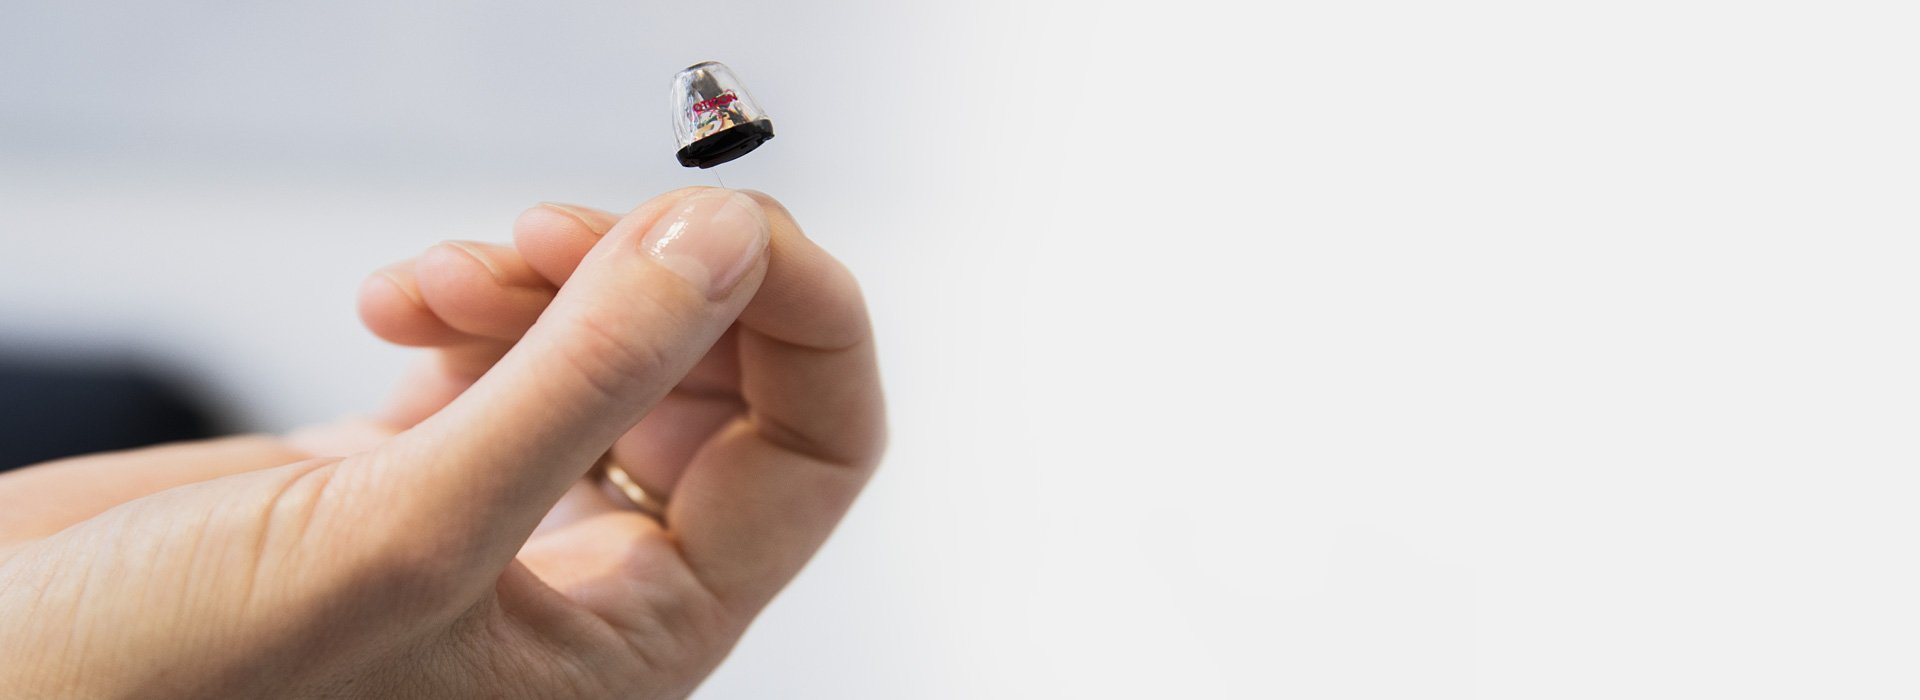 Image shows hand holding a hearing aid